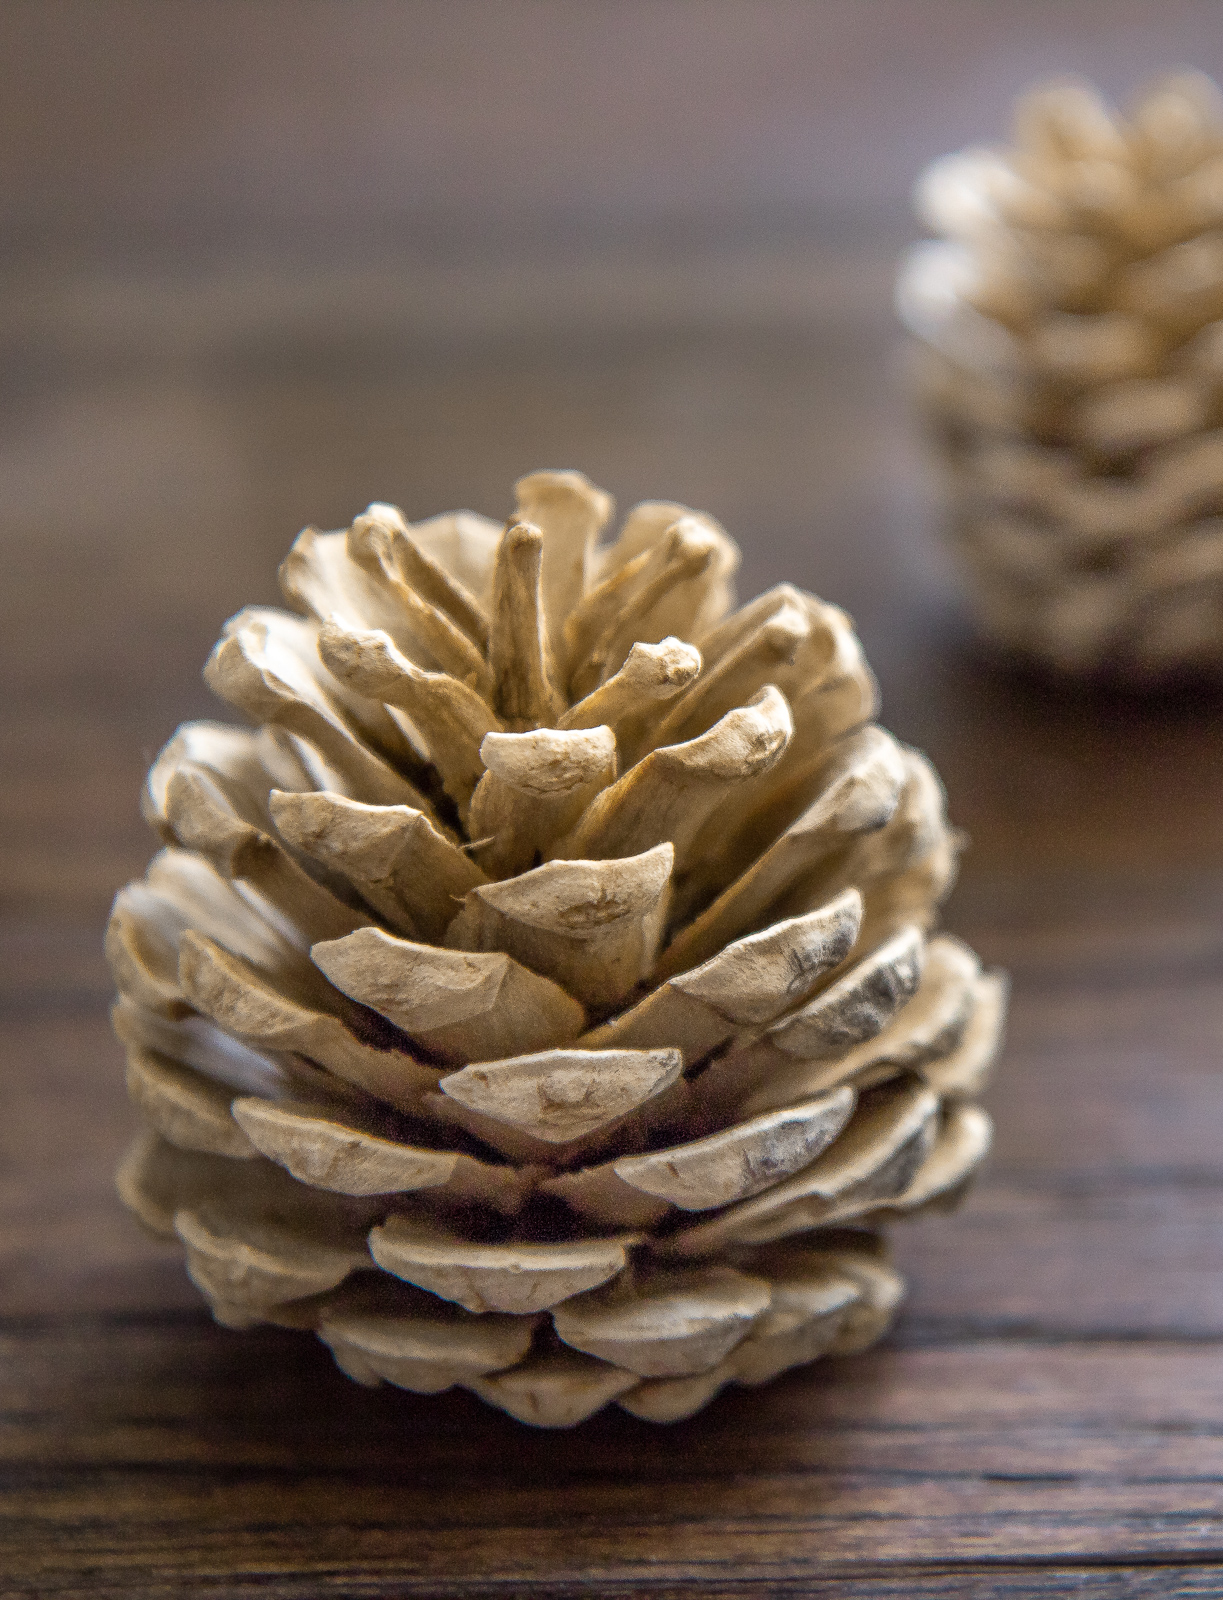 11 Amazing Uses for Pine Cones You Probably Didn't Know